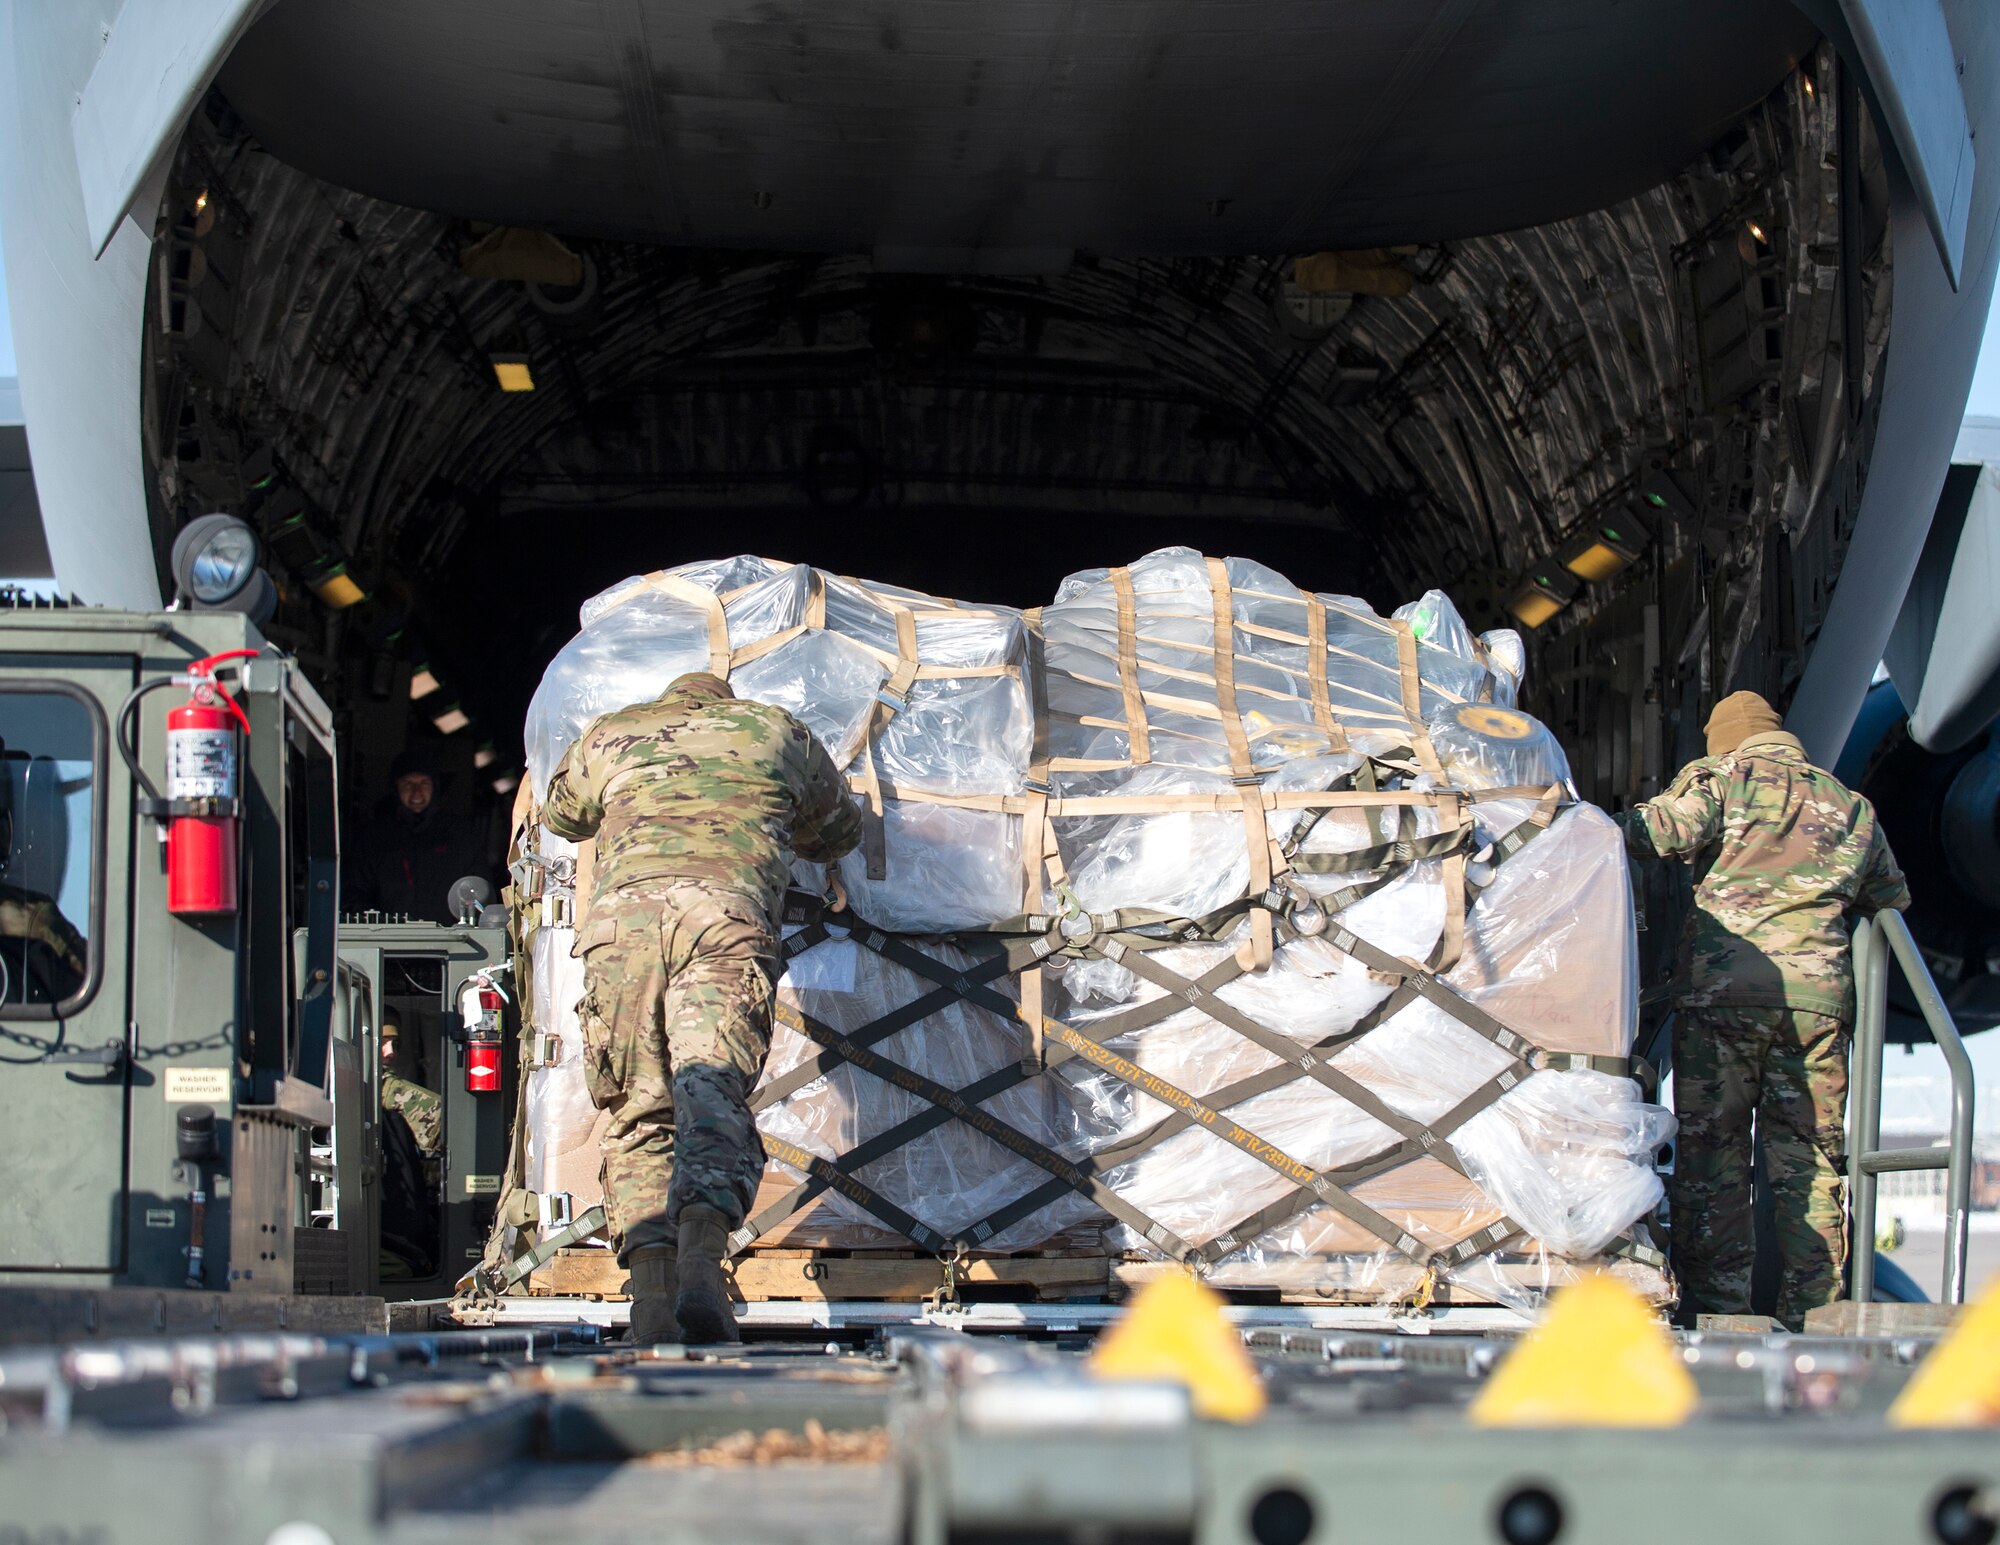 U.S. Air Force Airmen from the 133rd Air Transportation Function, load an estimated 11,300 pounds of medical supplies onto a C-17 Globemaster in St. Paul, Minn., Jan. 20, 2022.